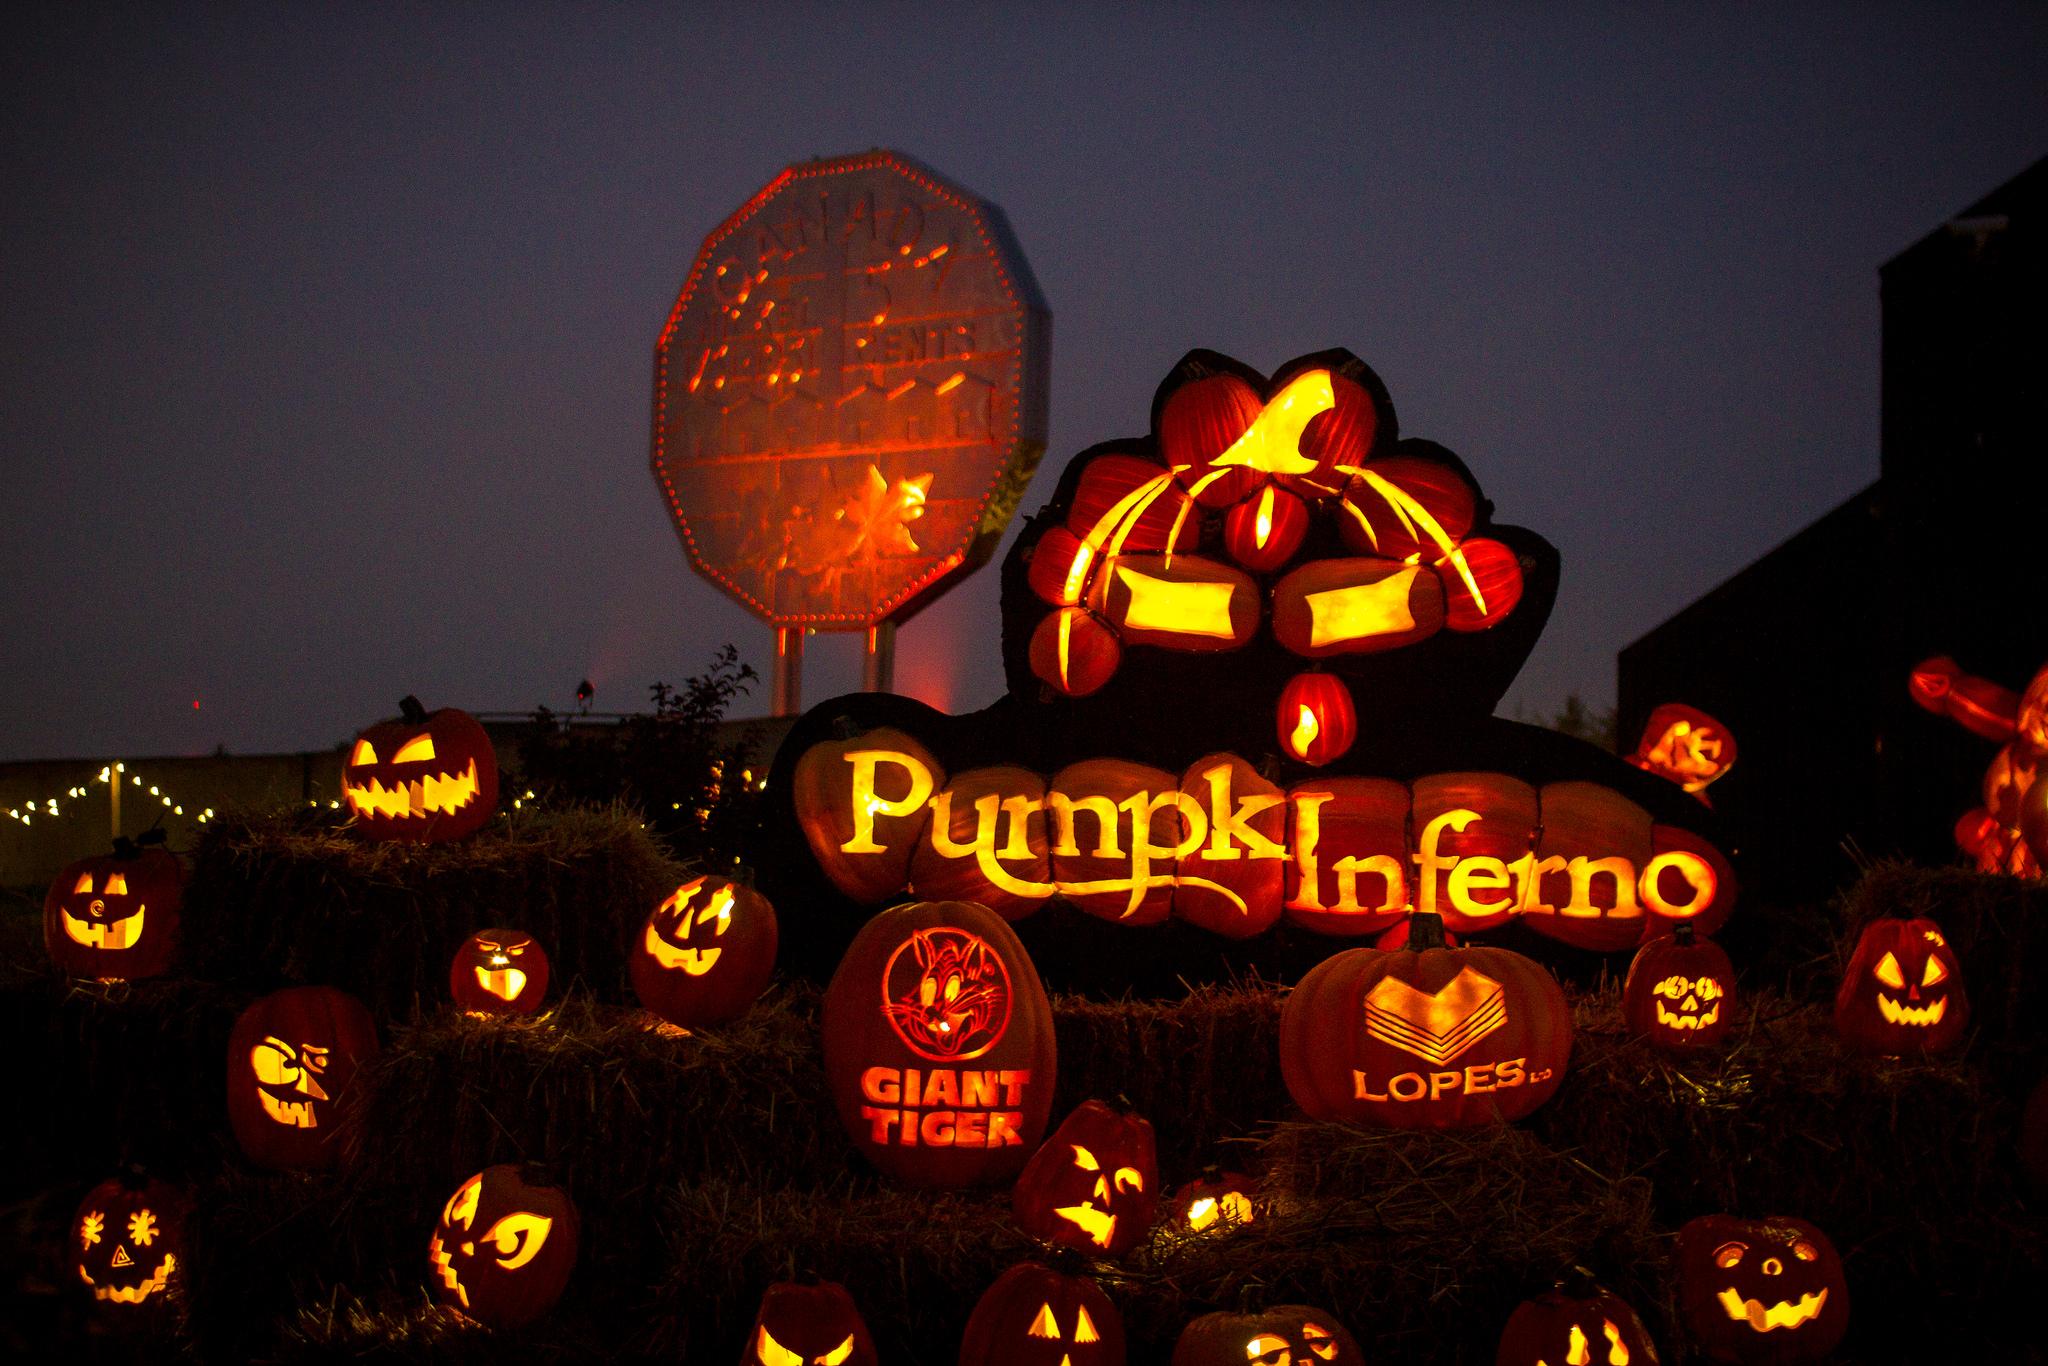 several elaborately-carved jack-o-lanterns glowing in the dark on,  surrounding a glowing "Pumpkinferno" sign